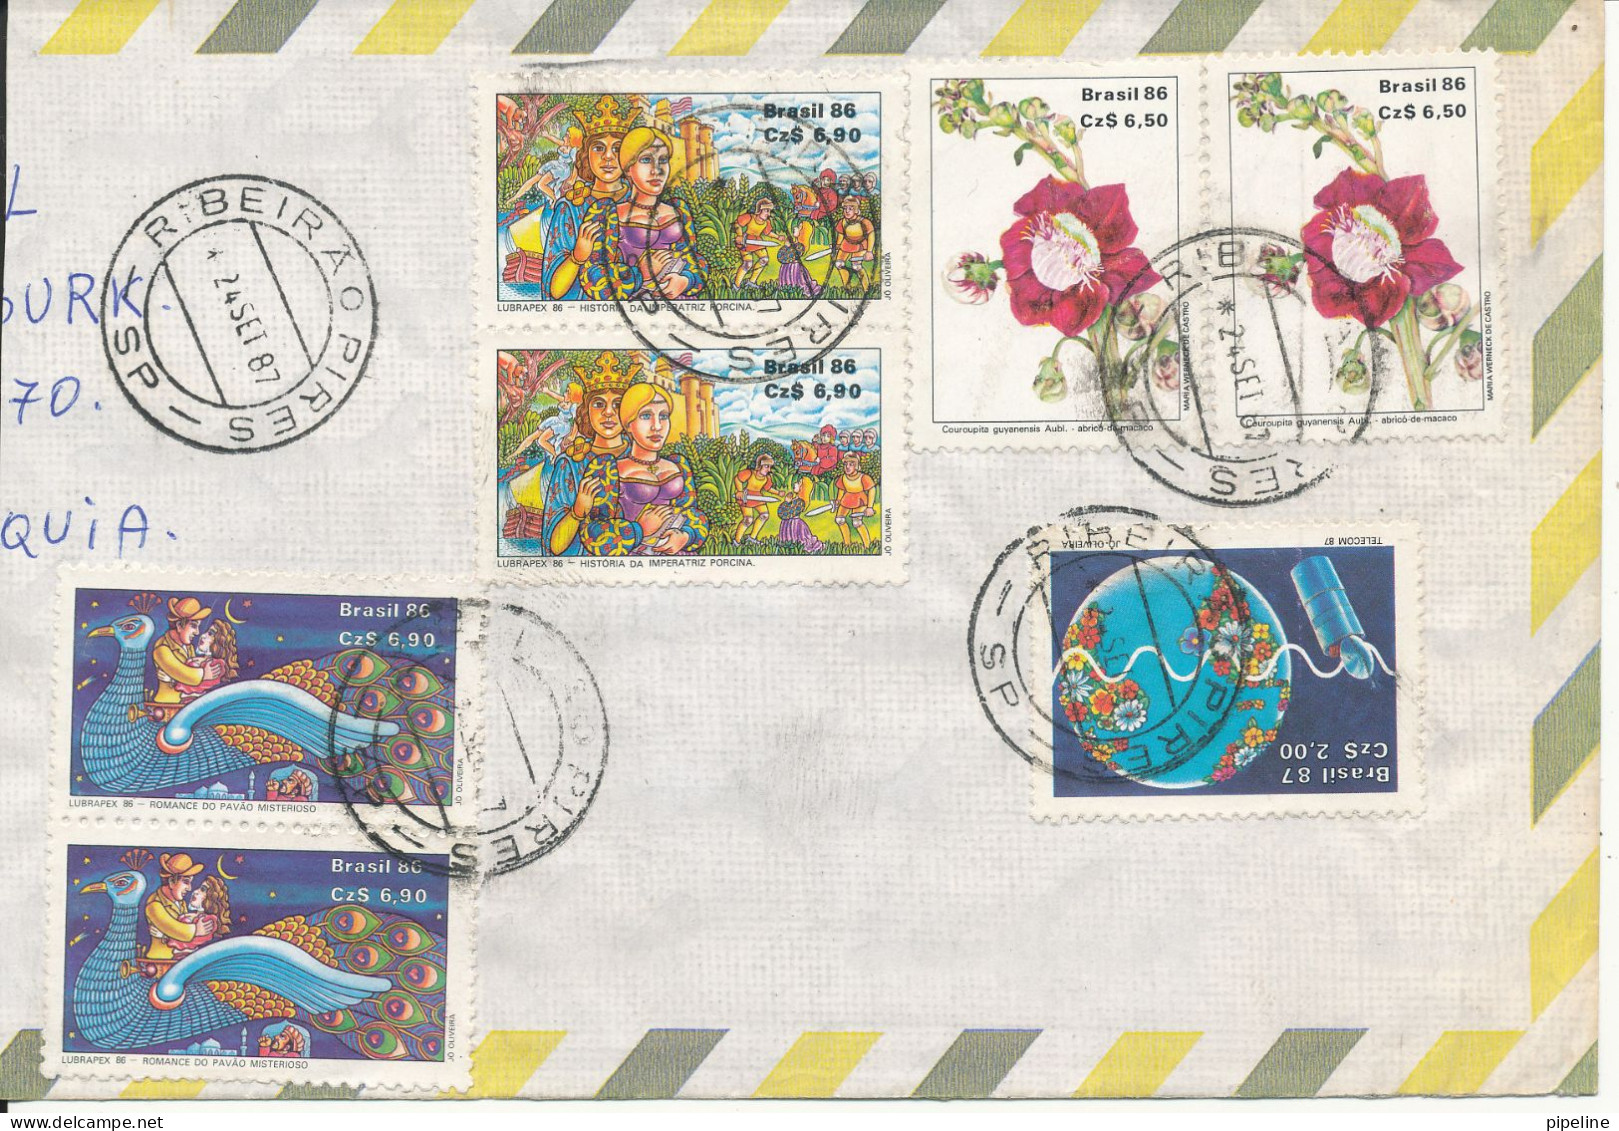 Brazil Air Mail Cover Sent To Czechoslovakia 24-9-1987 With A Lot Of Stamps (the Cover Is Cut In The Left Side) - Luftpost